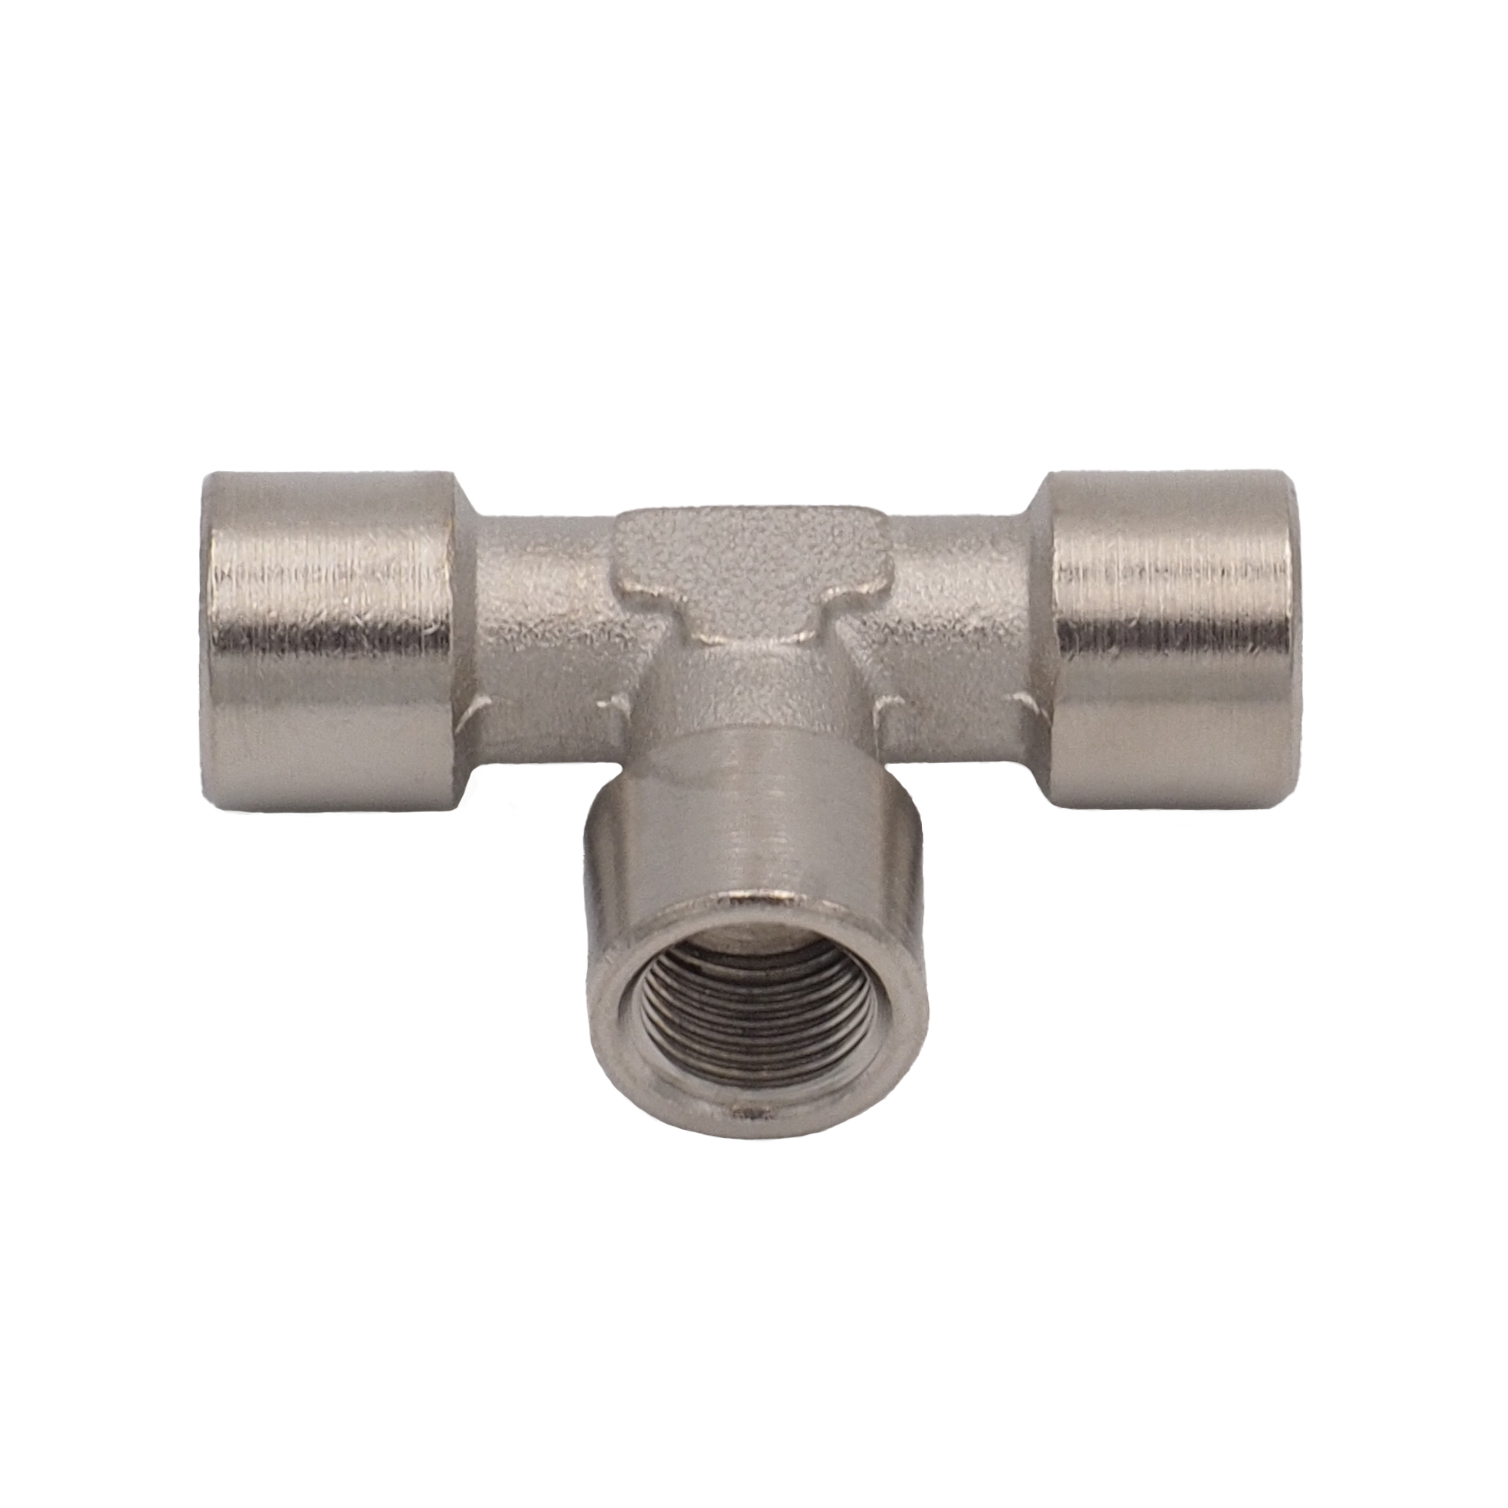 T-connector IT G1/8, nickel-plated brass